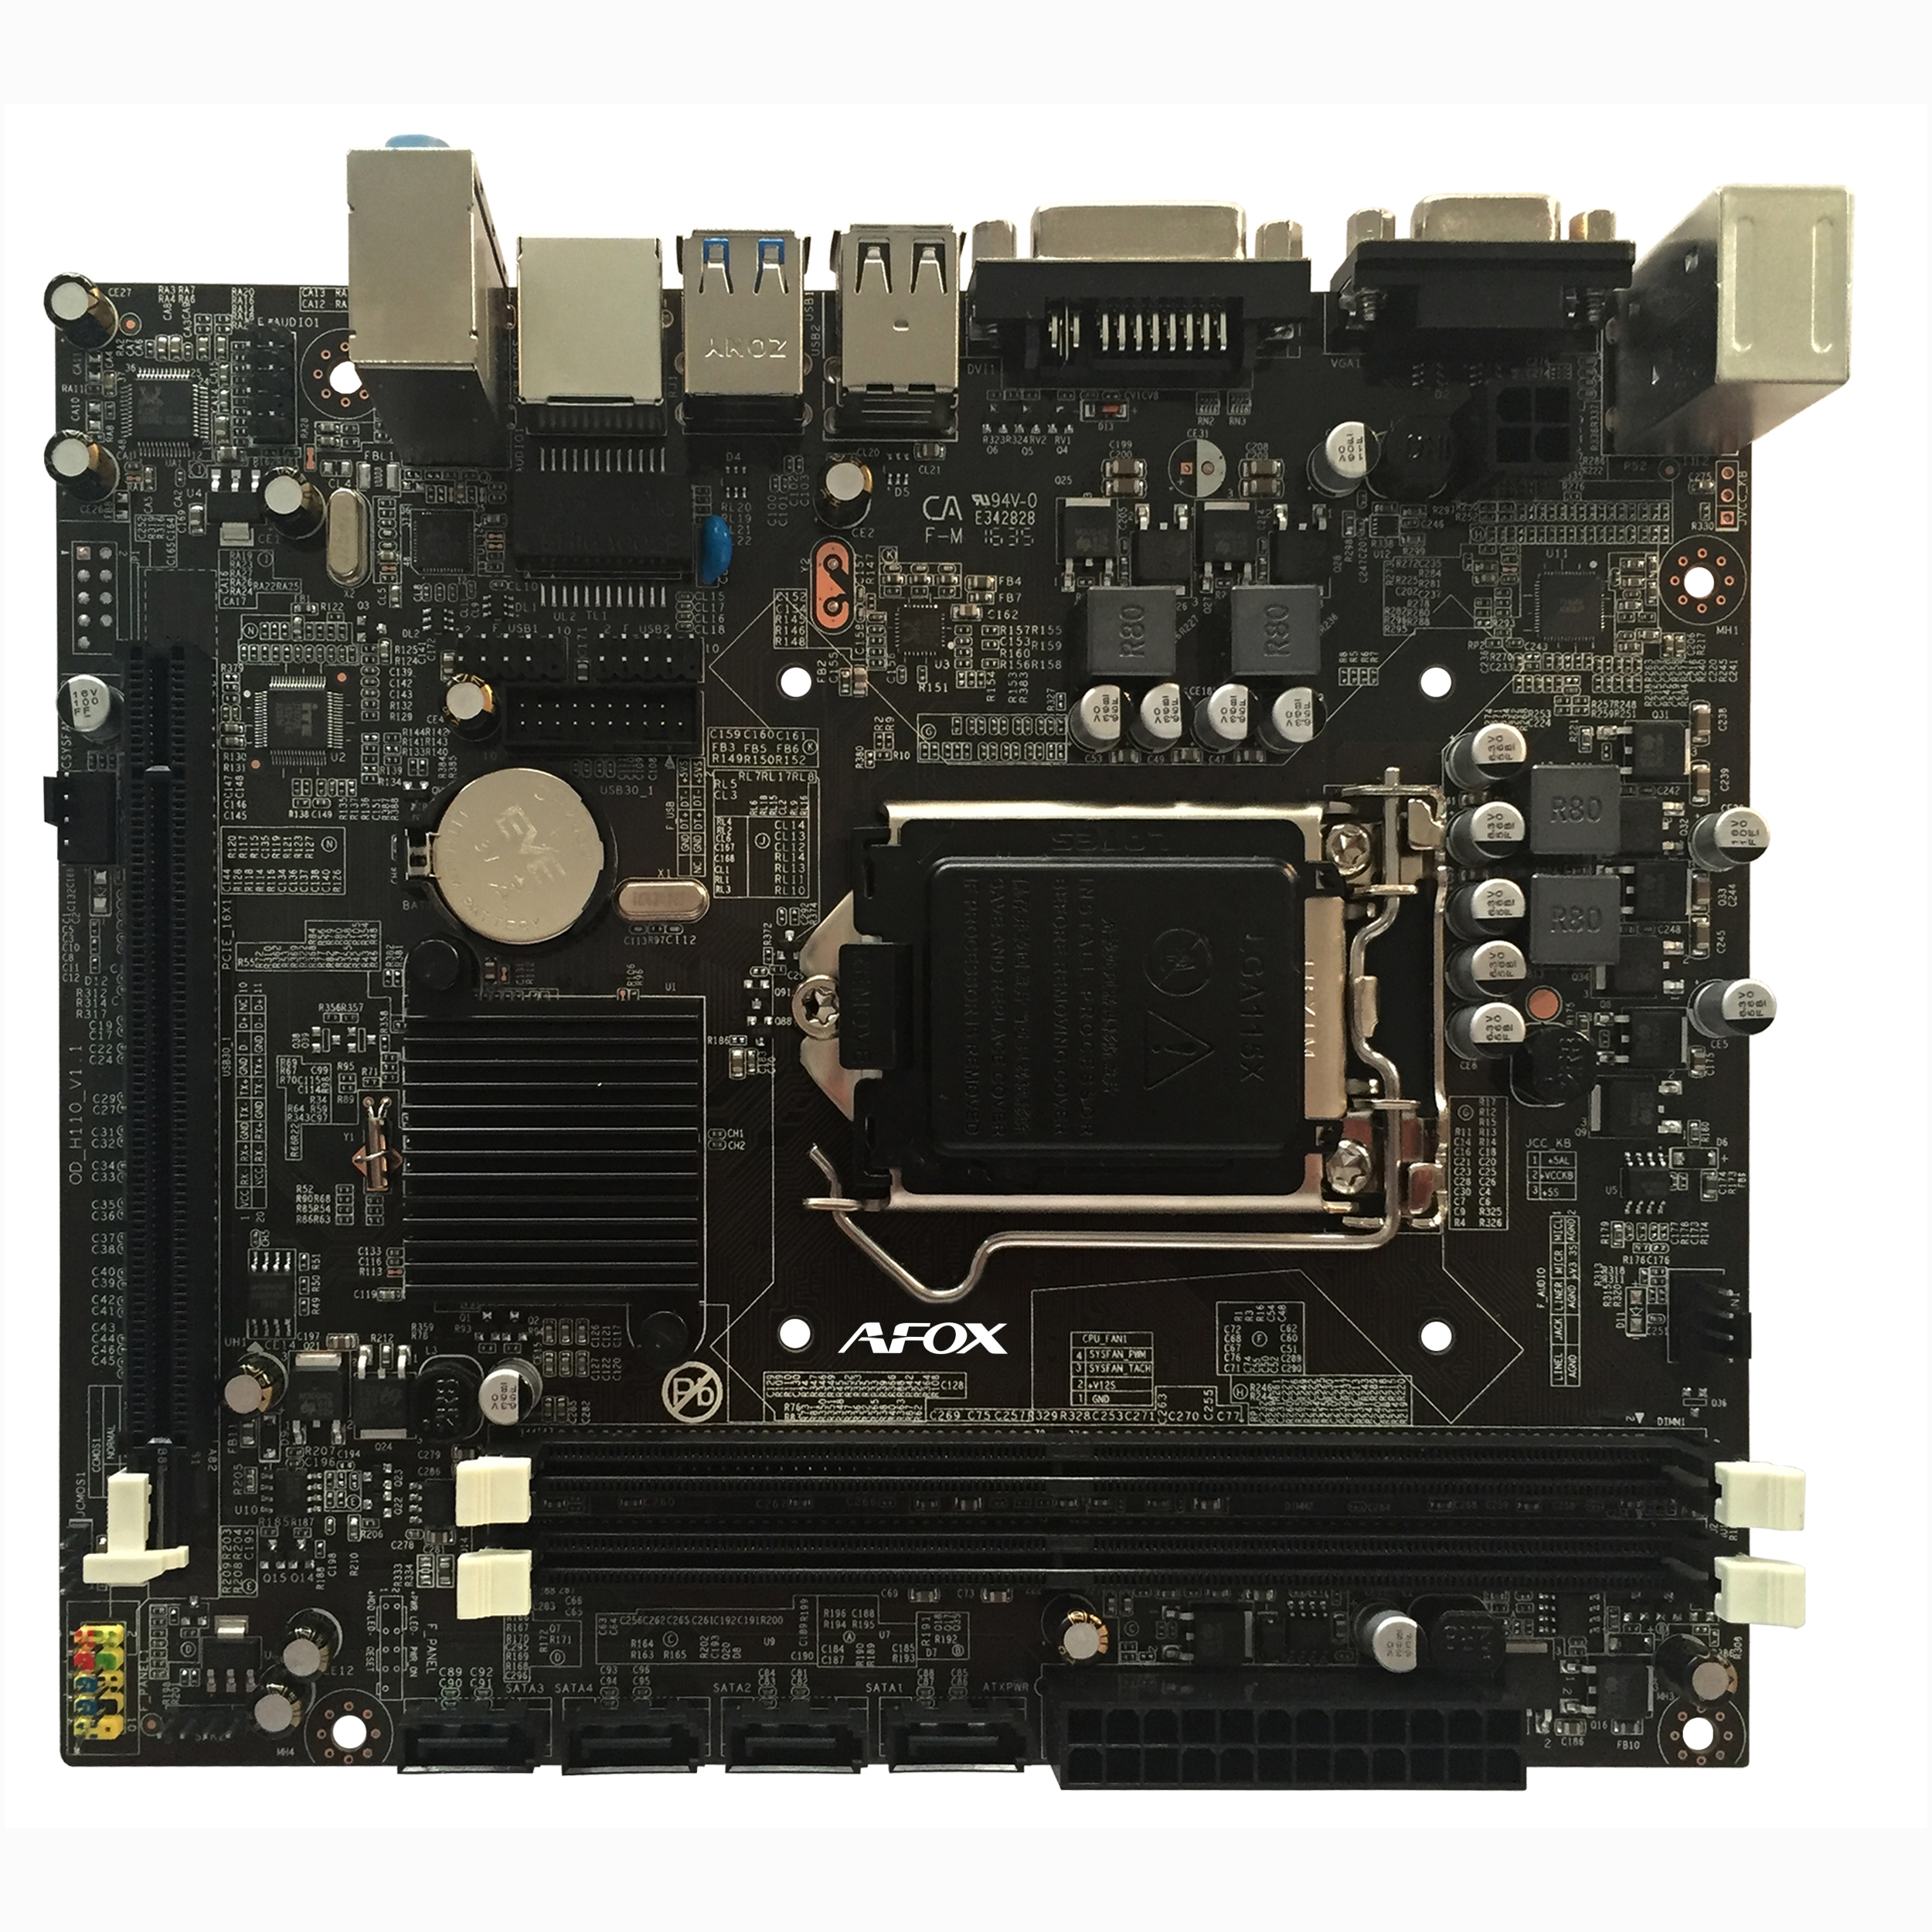 MB AFOX I7 INTEL H110M PRO-VDL SOK1151 DDR4+SB+LAN+USB3+VGA+DVI H110M	 مستعمل ,Other Used Items